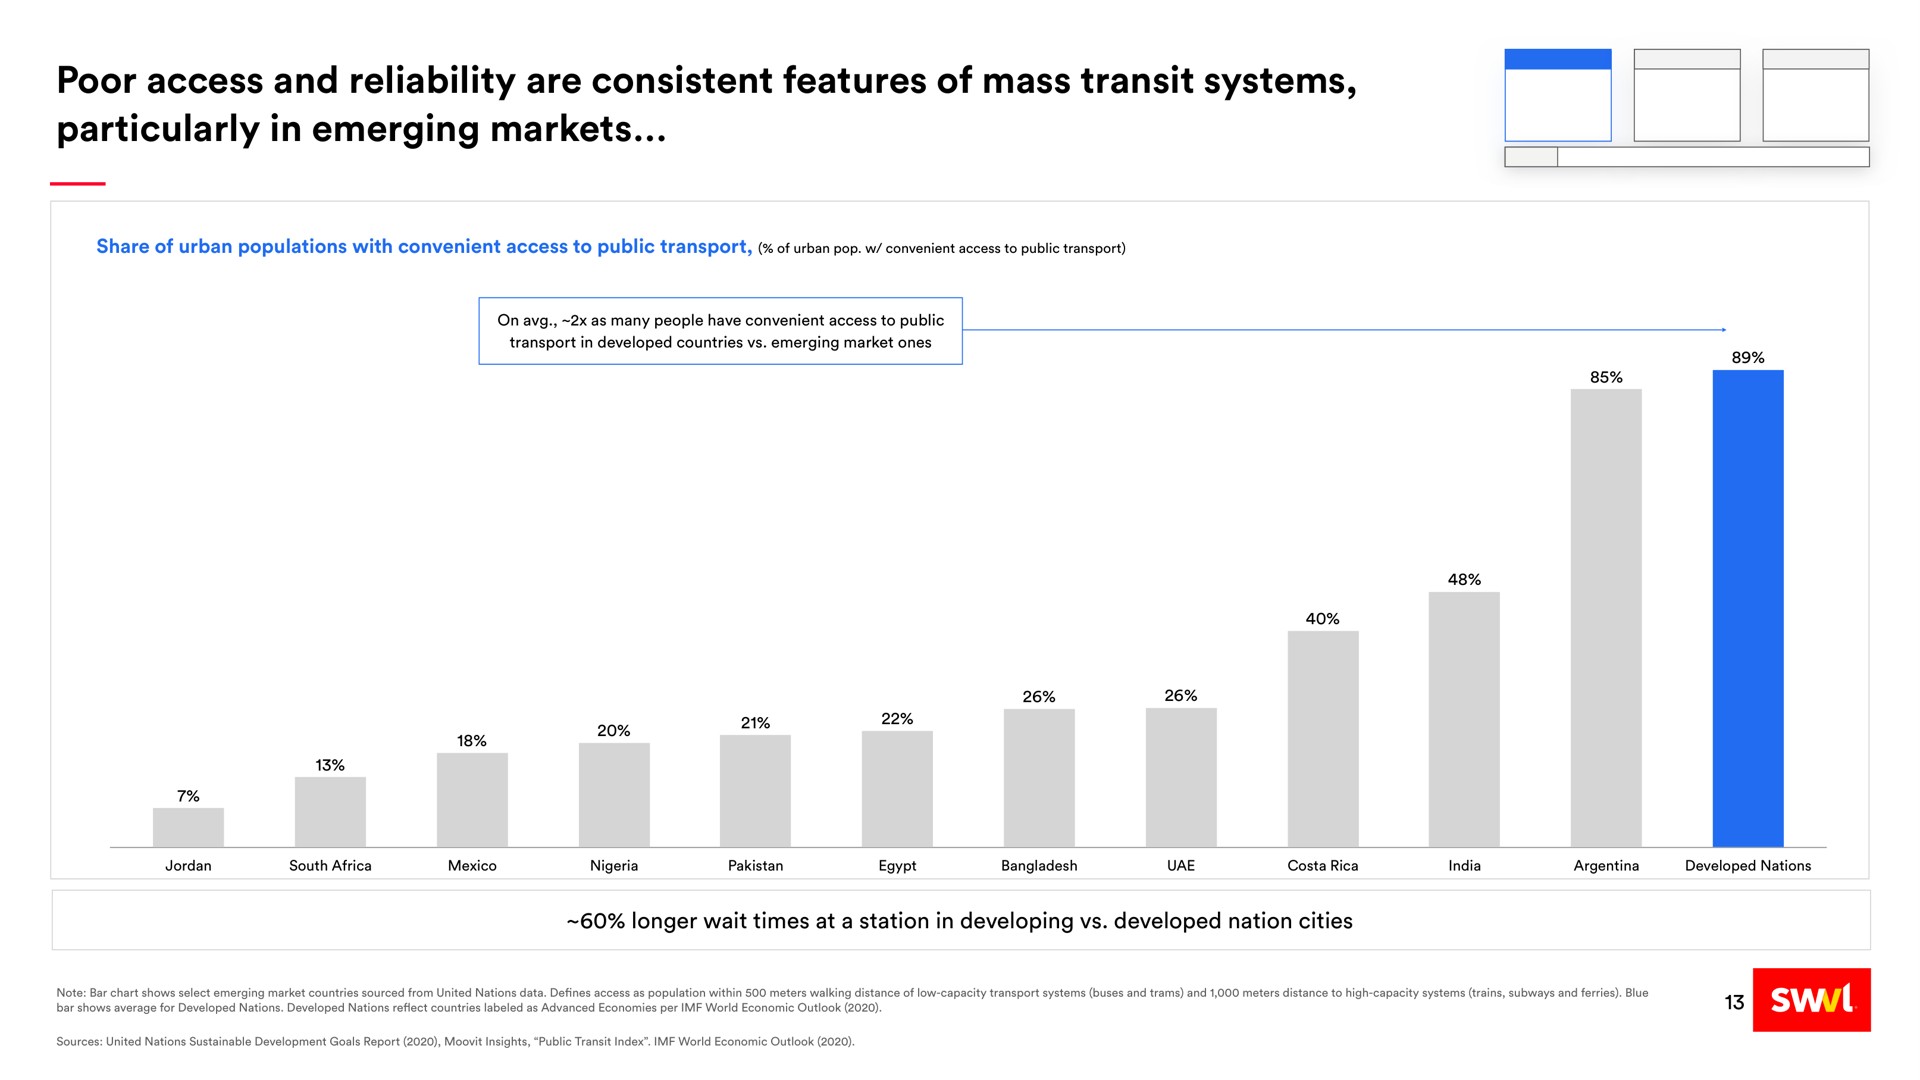 poor access and reliability are consistent features of mass transit systems particularly in emerging markets | Swvl